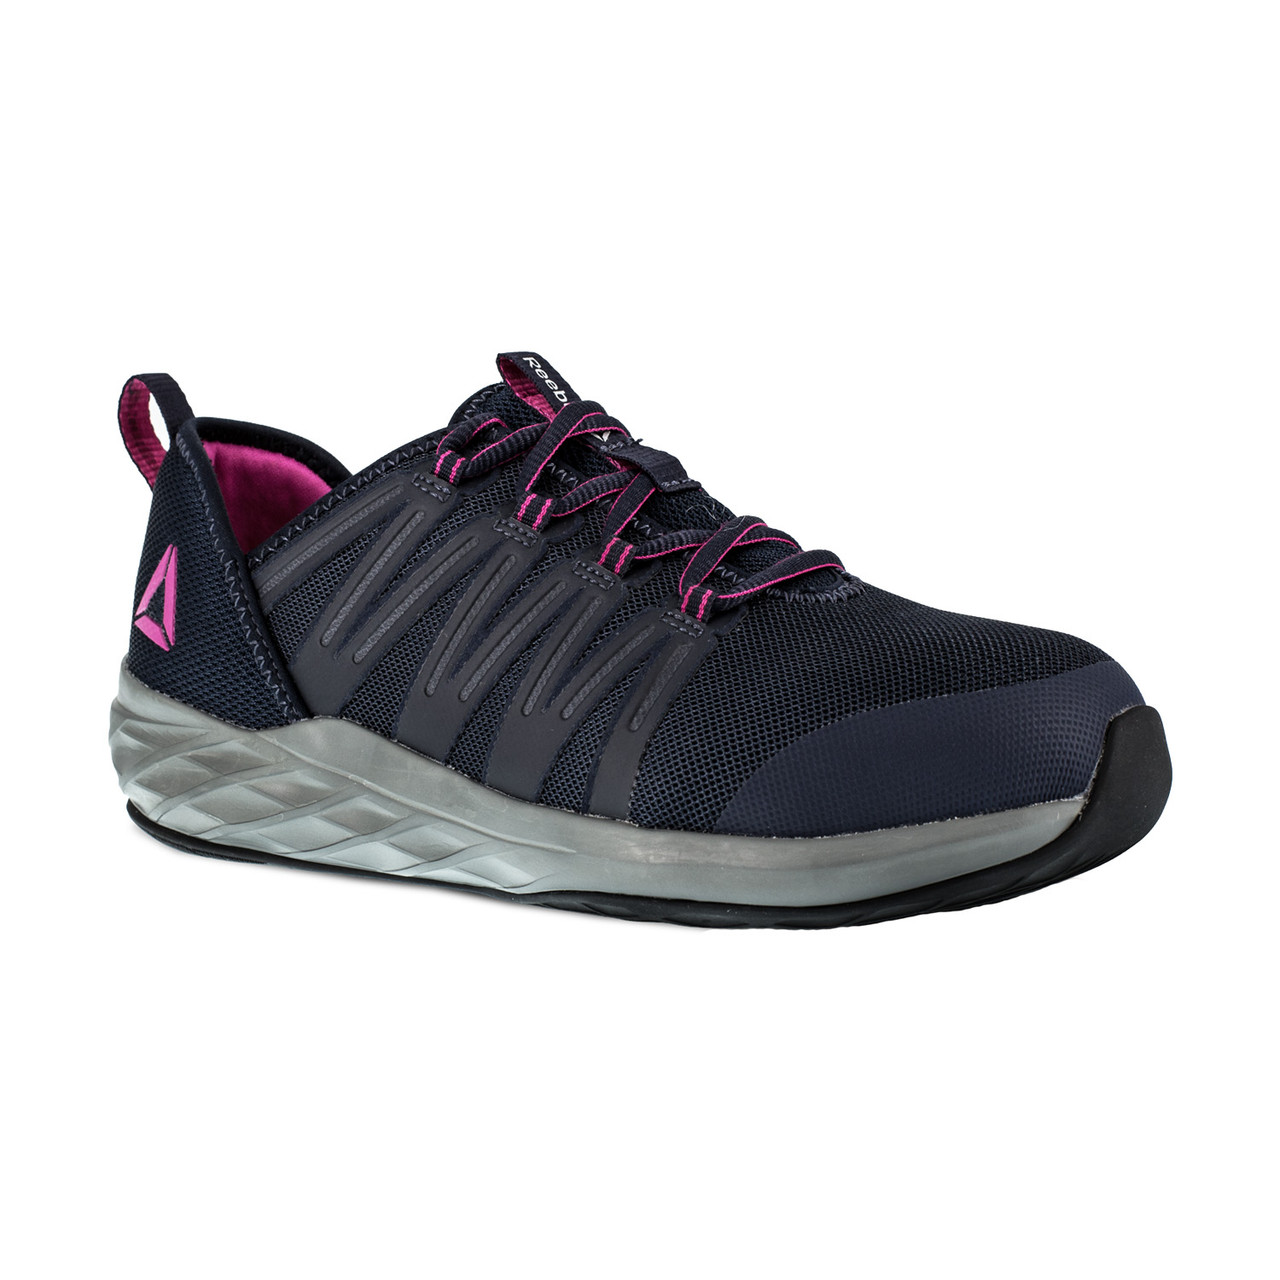 Reebok Astroride Work #RB308 Women's Athletic Static Dissipative Steel  Safety Toe